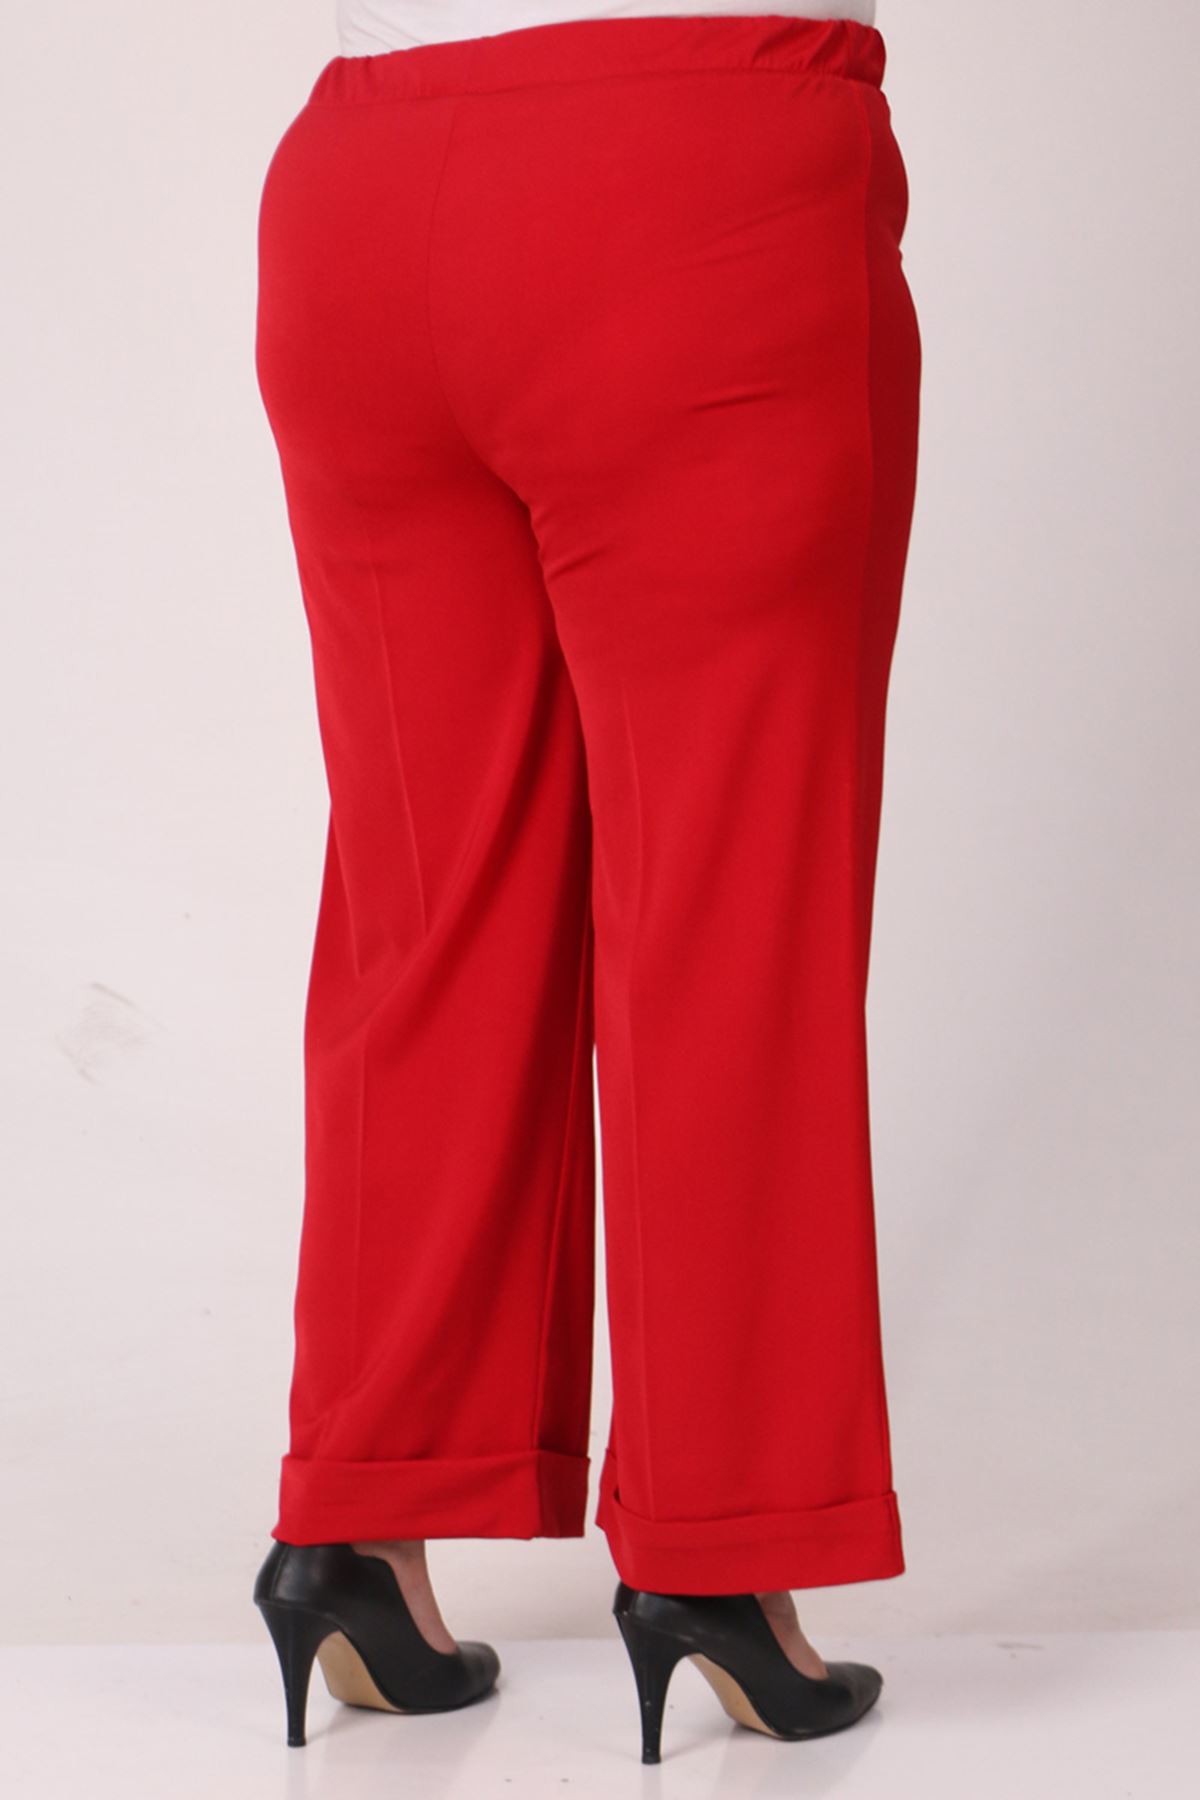 39022 Large Size Elastic Waist Double Leg Trousers - Red